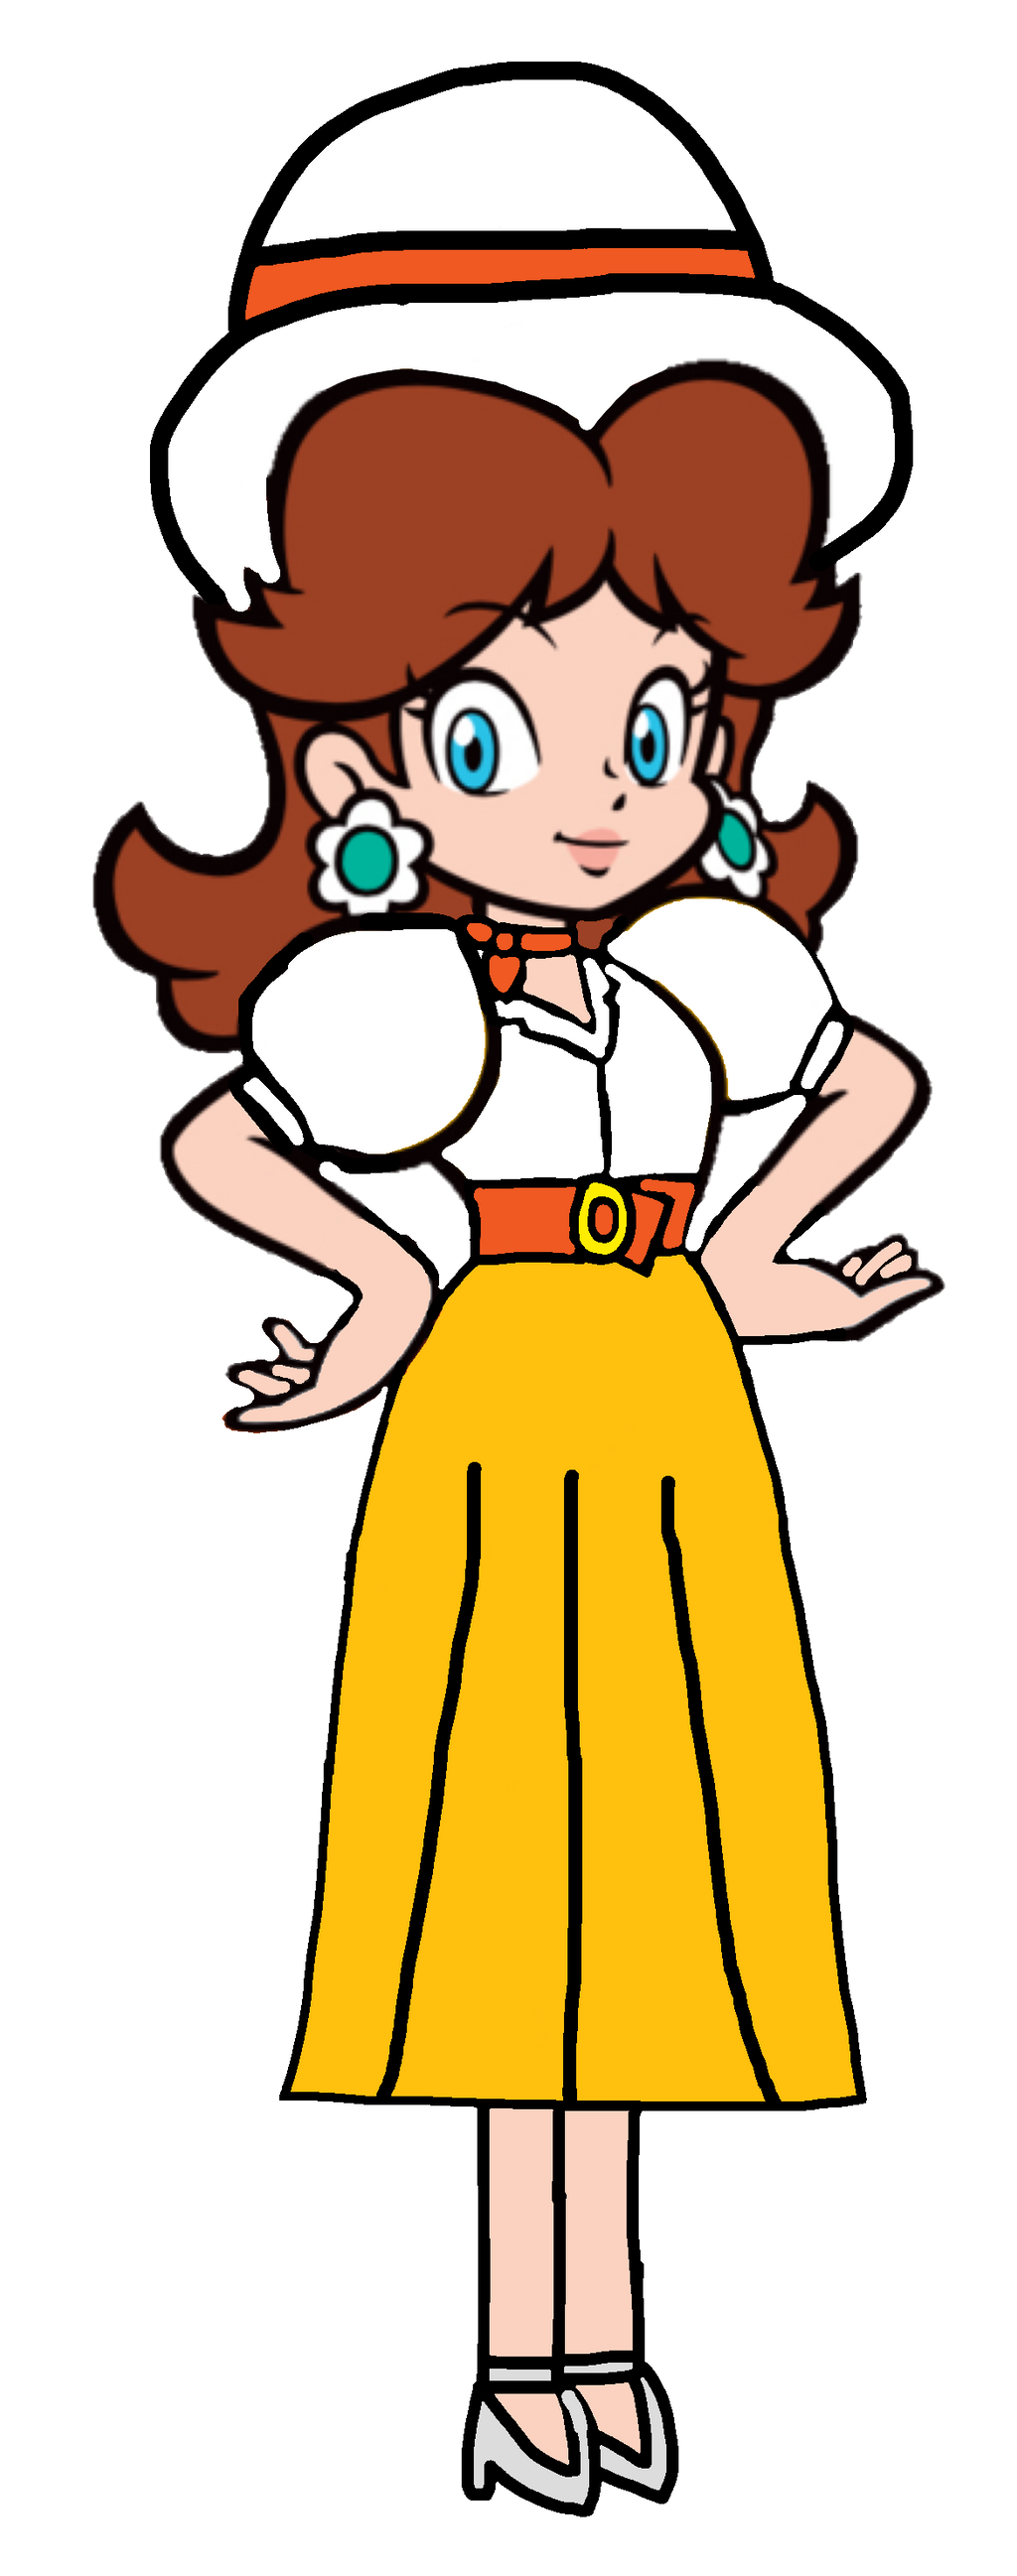 Super Mario: Princess Daisy Travel Outfit 2D by Joshuat1306 on DeviantArt